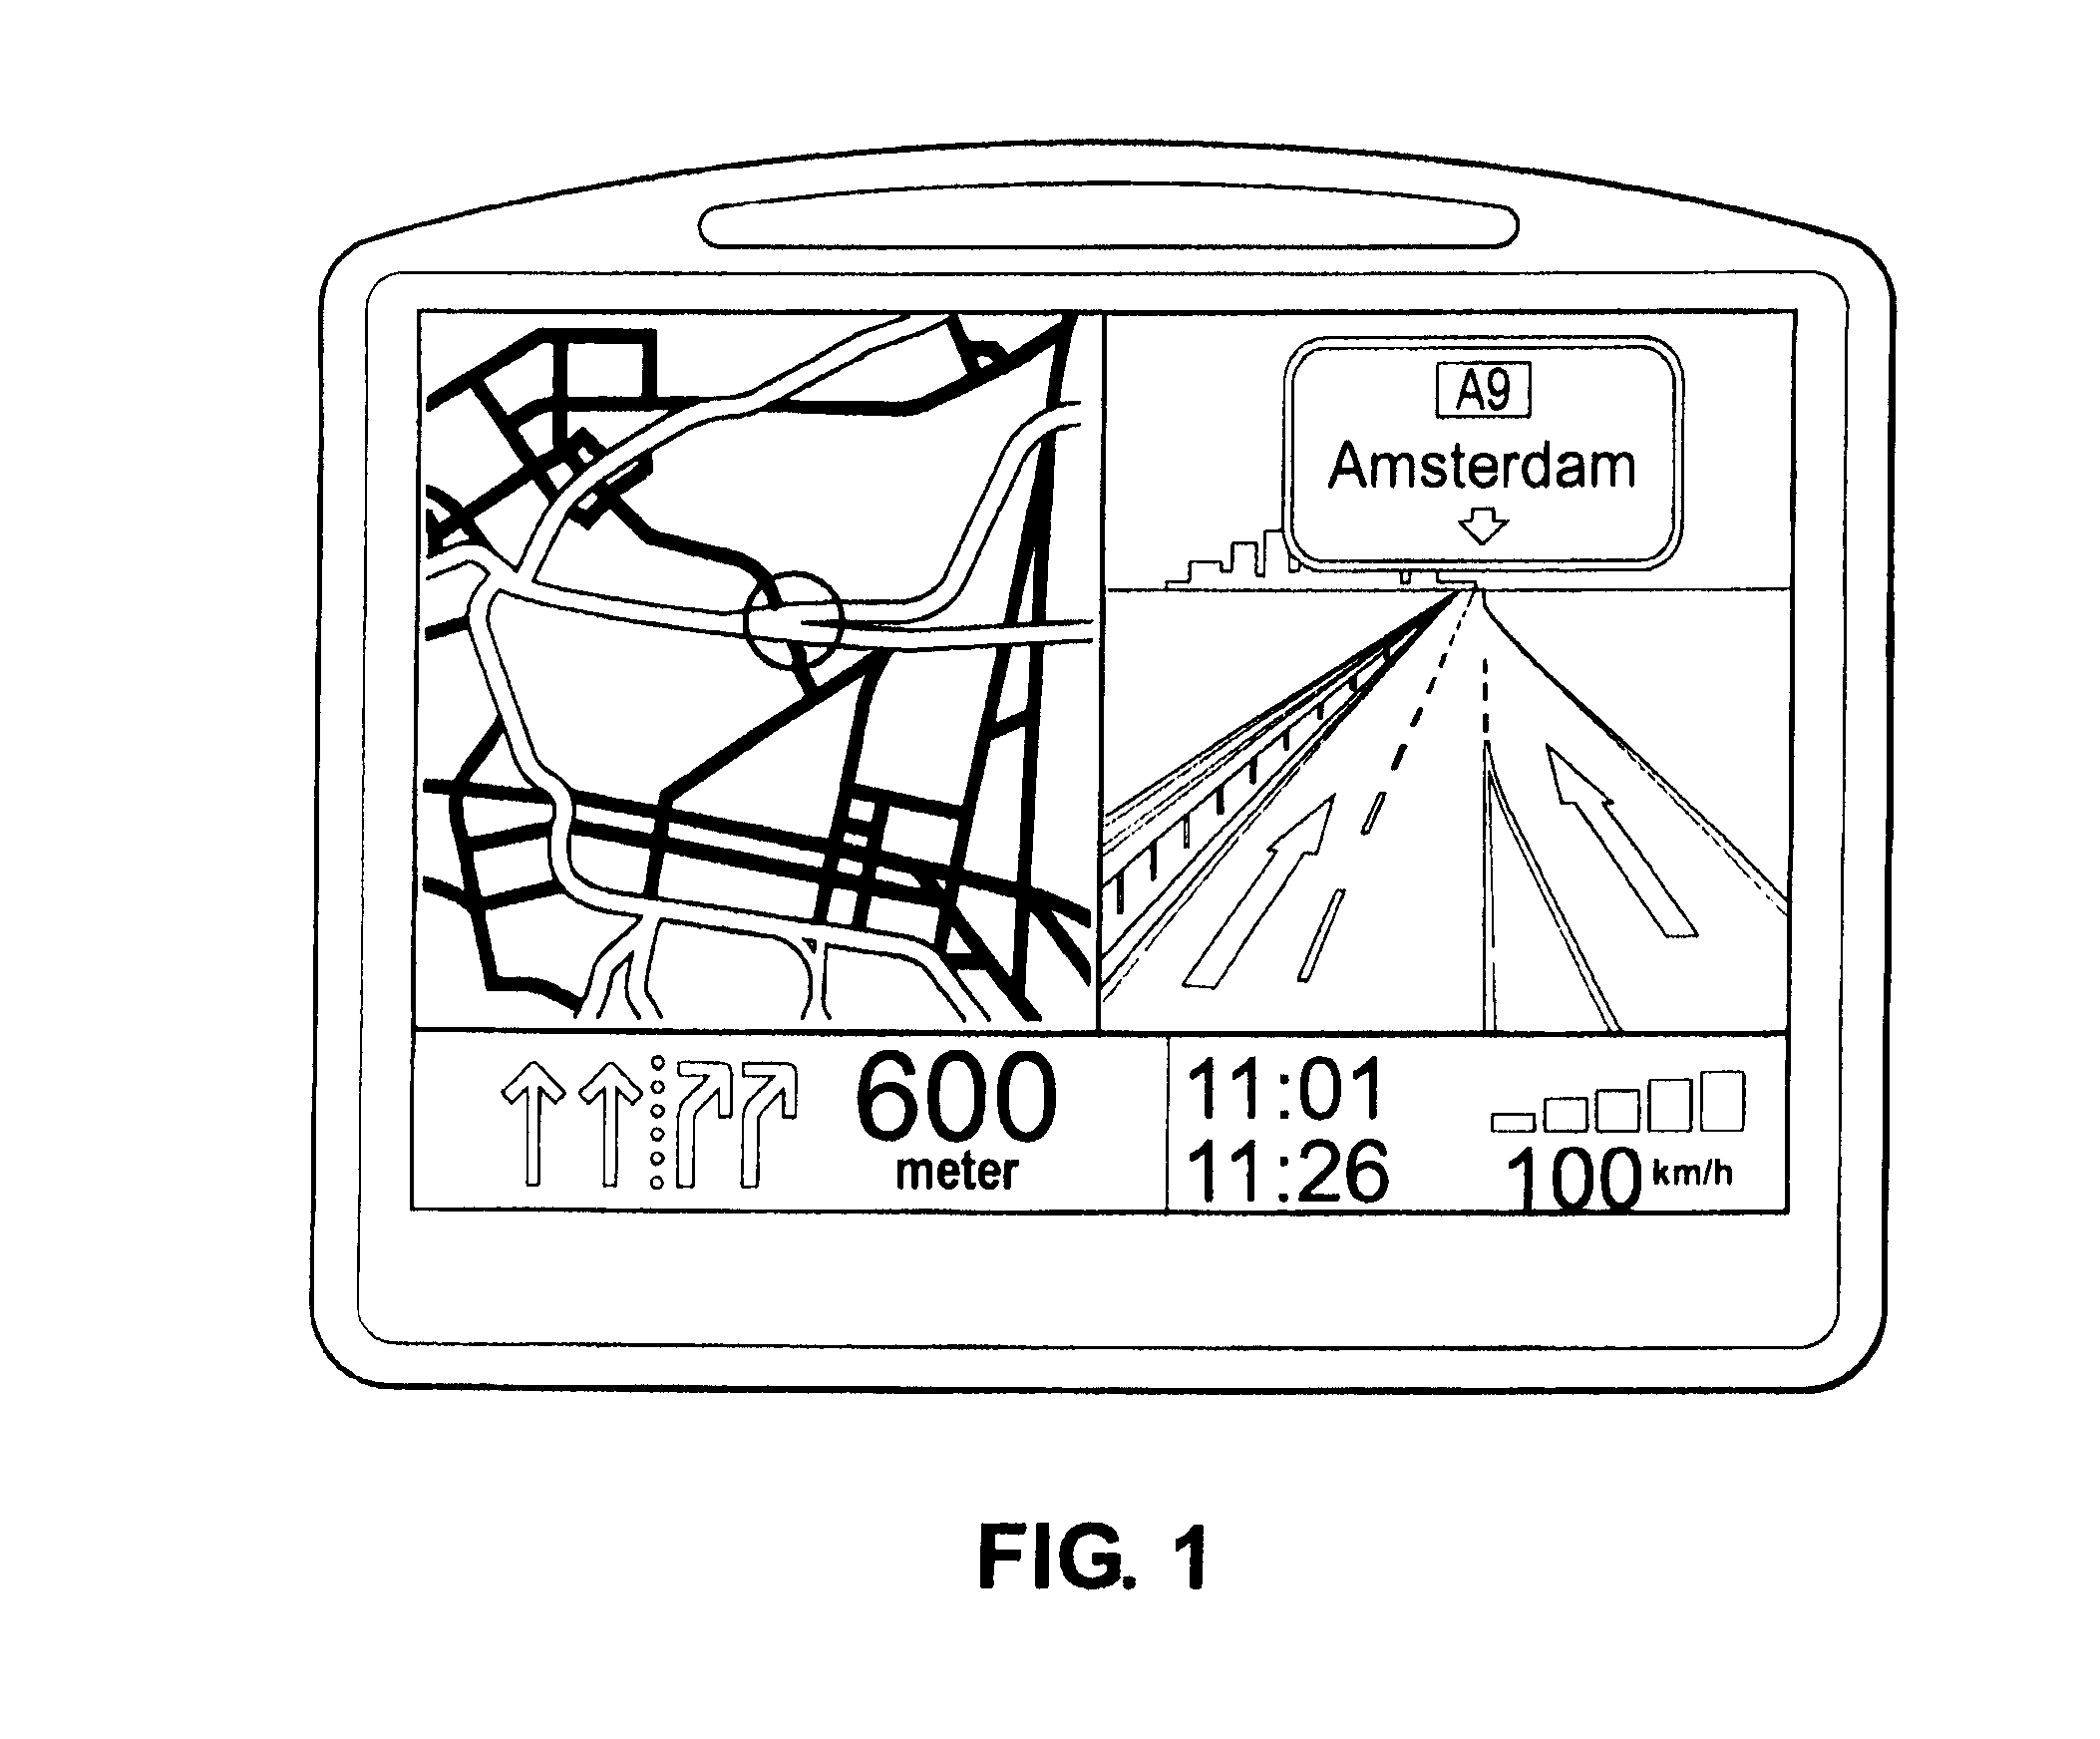 Method of Verifying or deriving Attribute Information of a Digital Transport Network Database Using Interpolation and Probe Traces